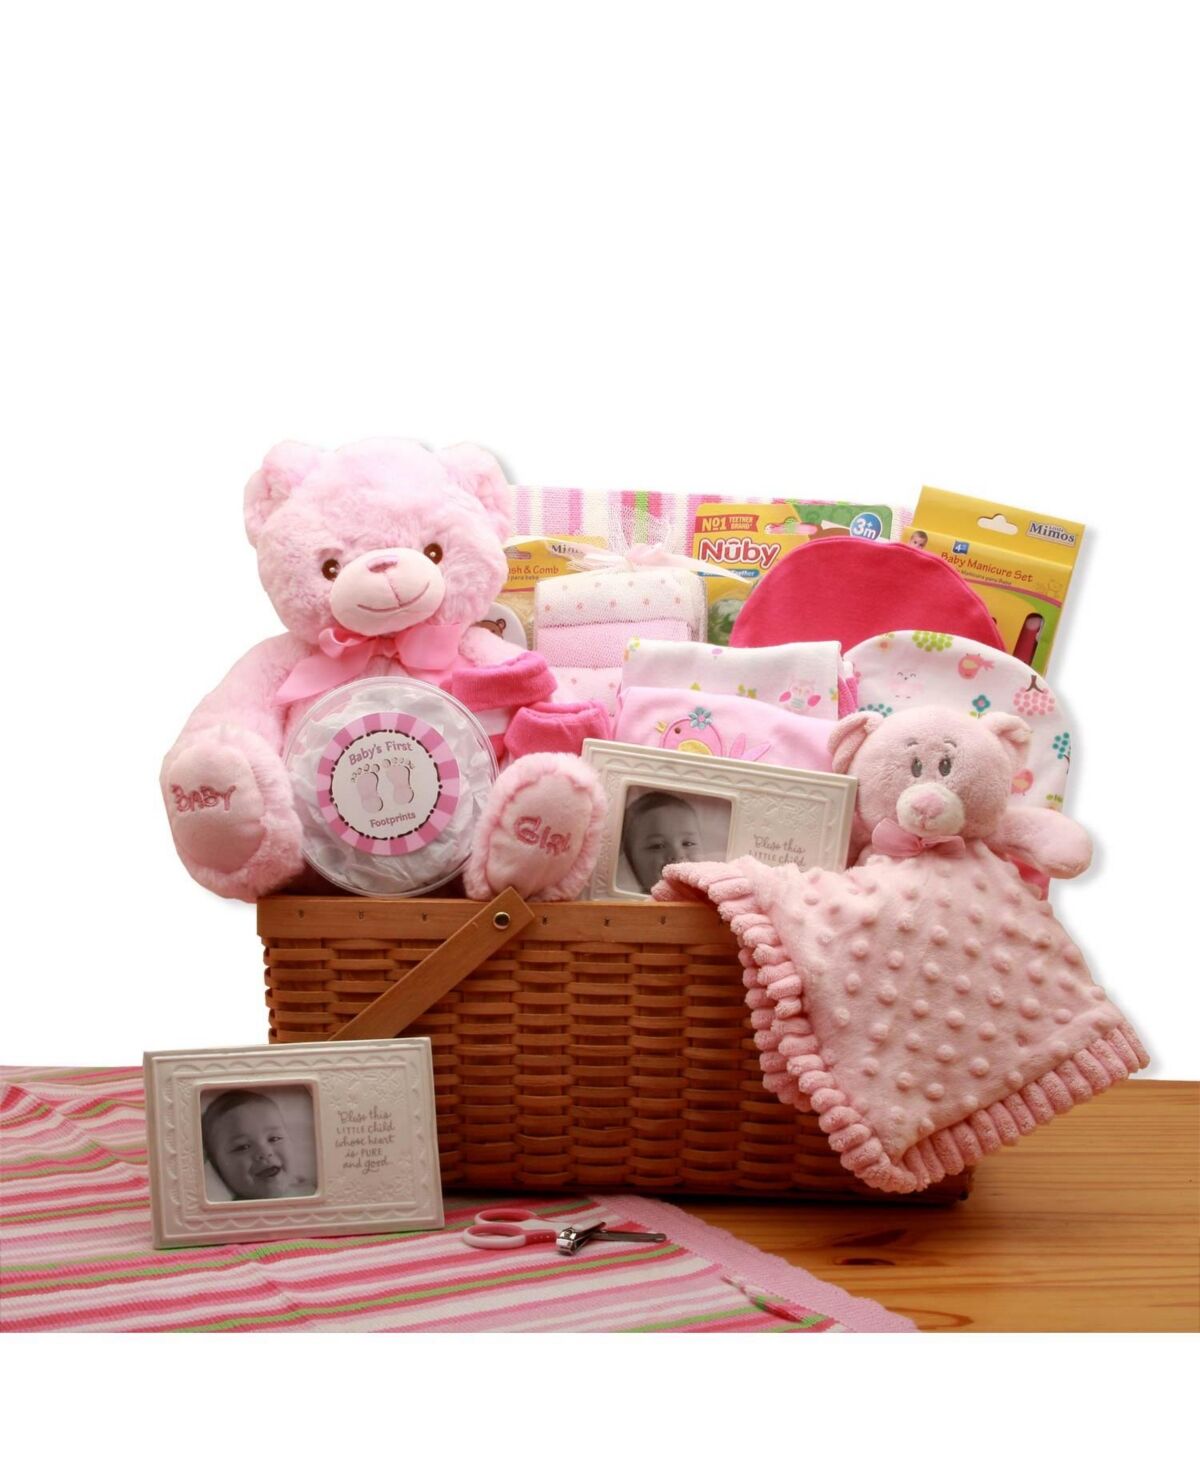 Gbds My First Teddy Bear New Baby Gift Basket - Pink - baby bath set - baby girl gifts - 1 Basket